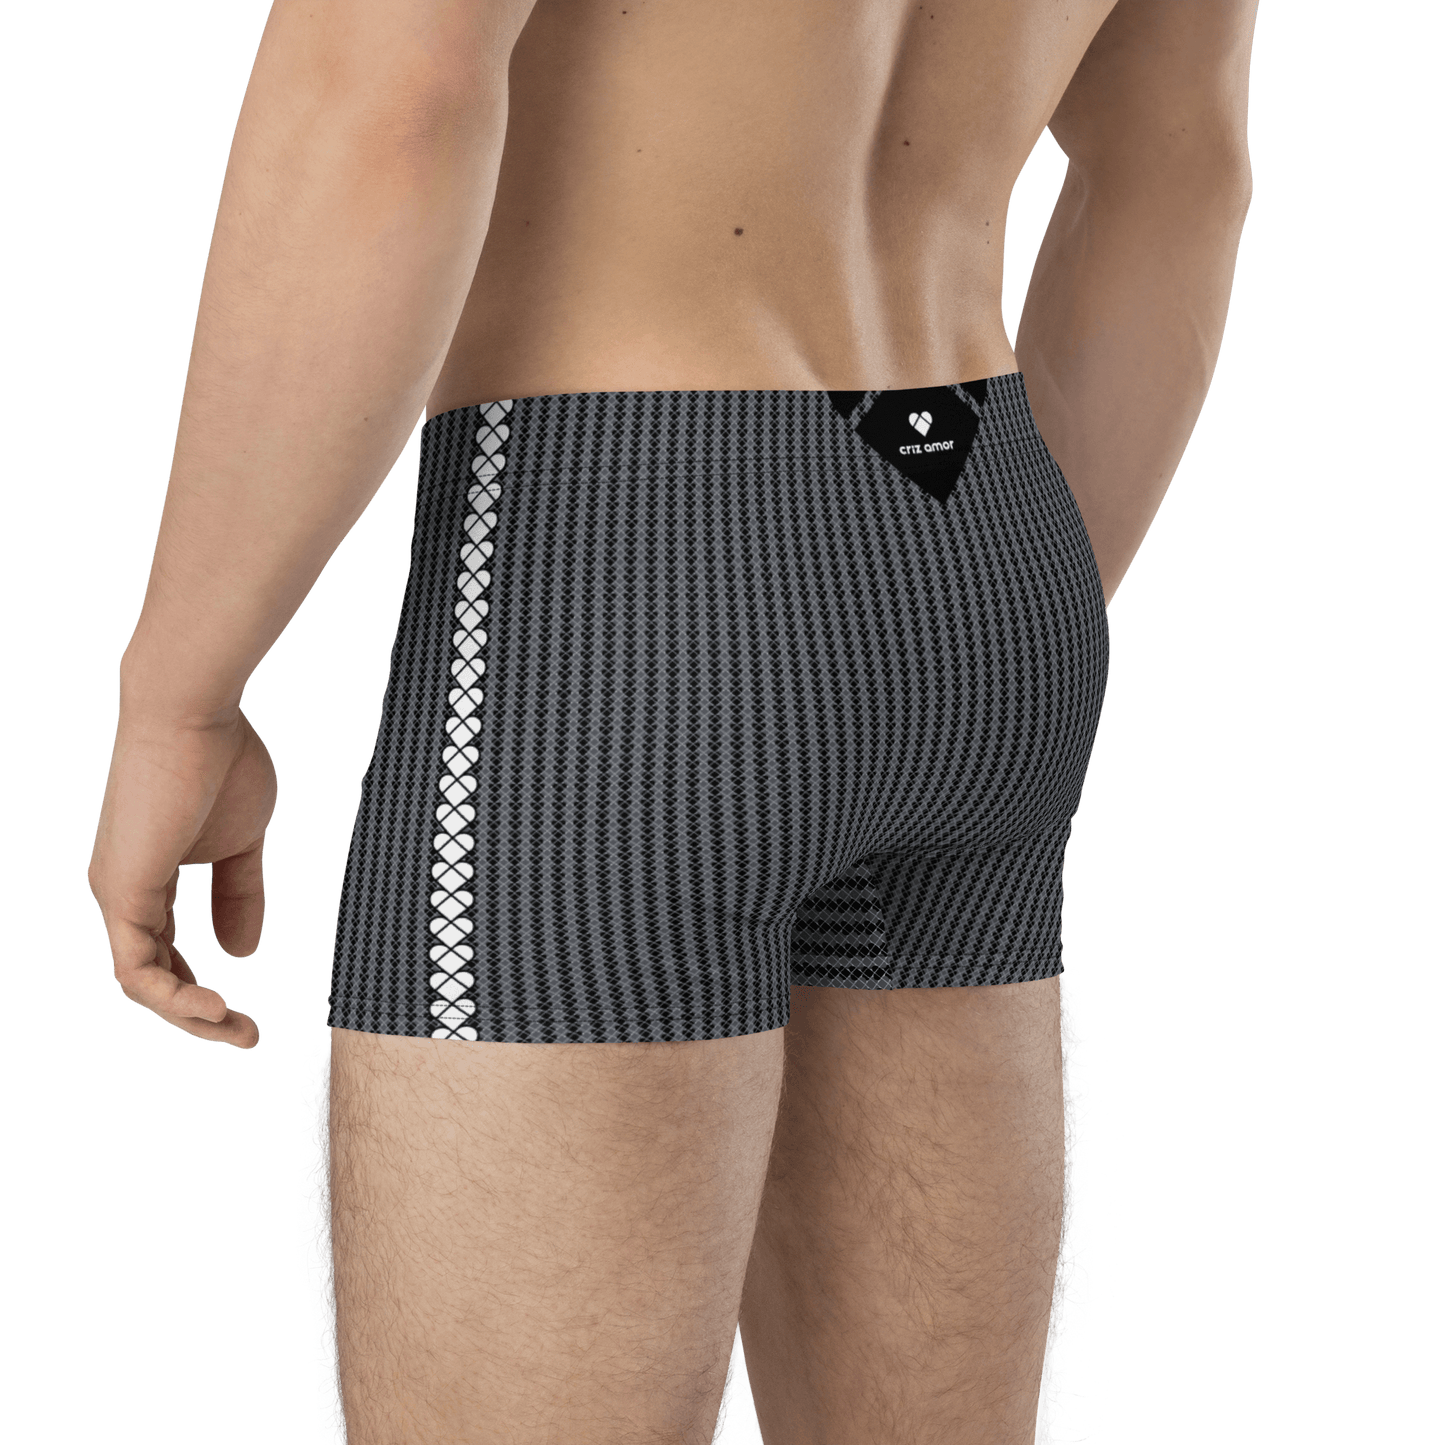 Men's heart-patterned boxers from CRiZ AMOR's Amor Primero Collection